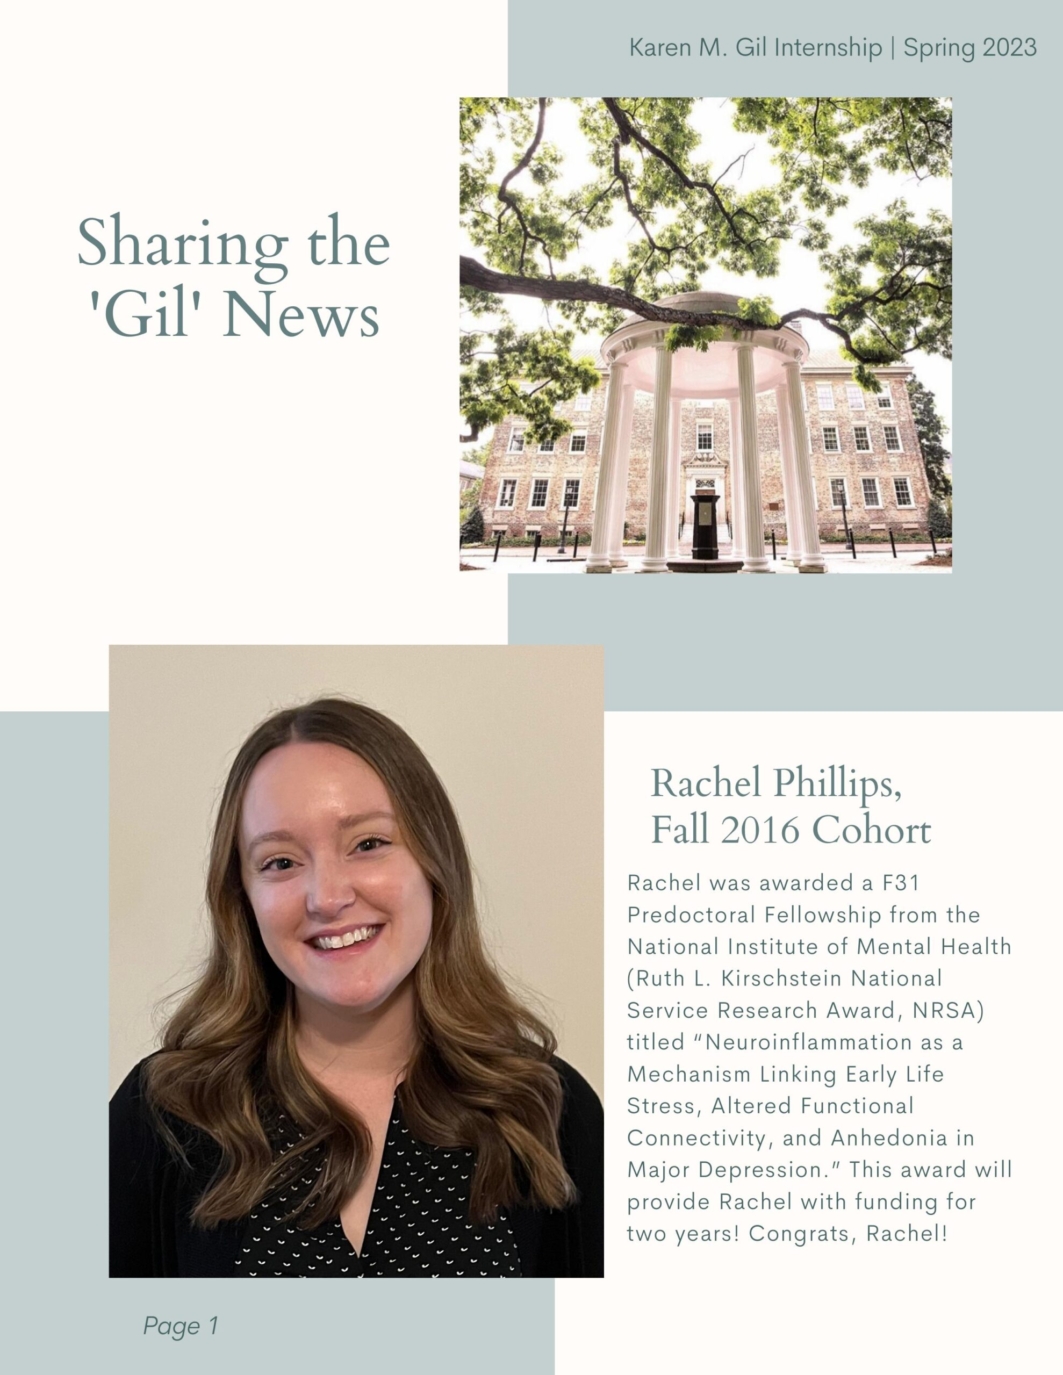 Sharing the Gil News Spring 2023-1